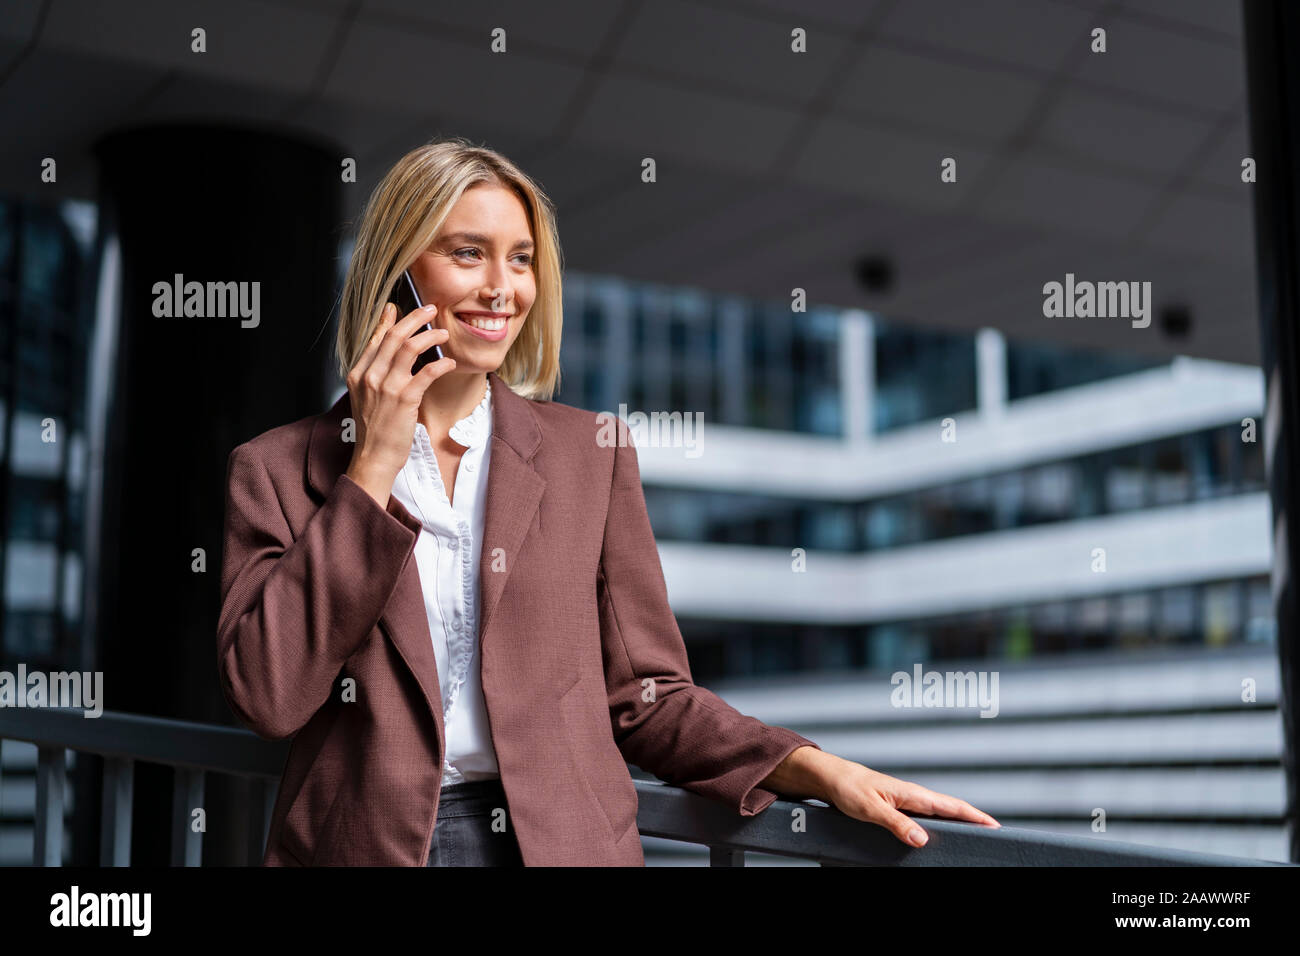 Smiling young businesswoman on the phone in the city Stock Photo